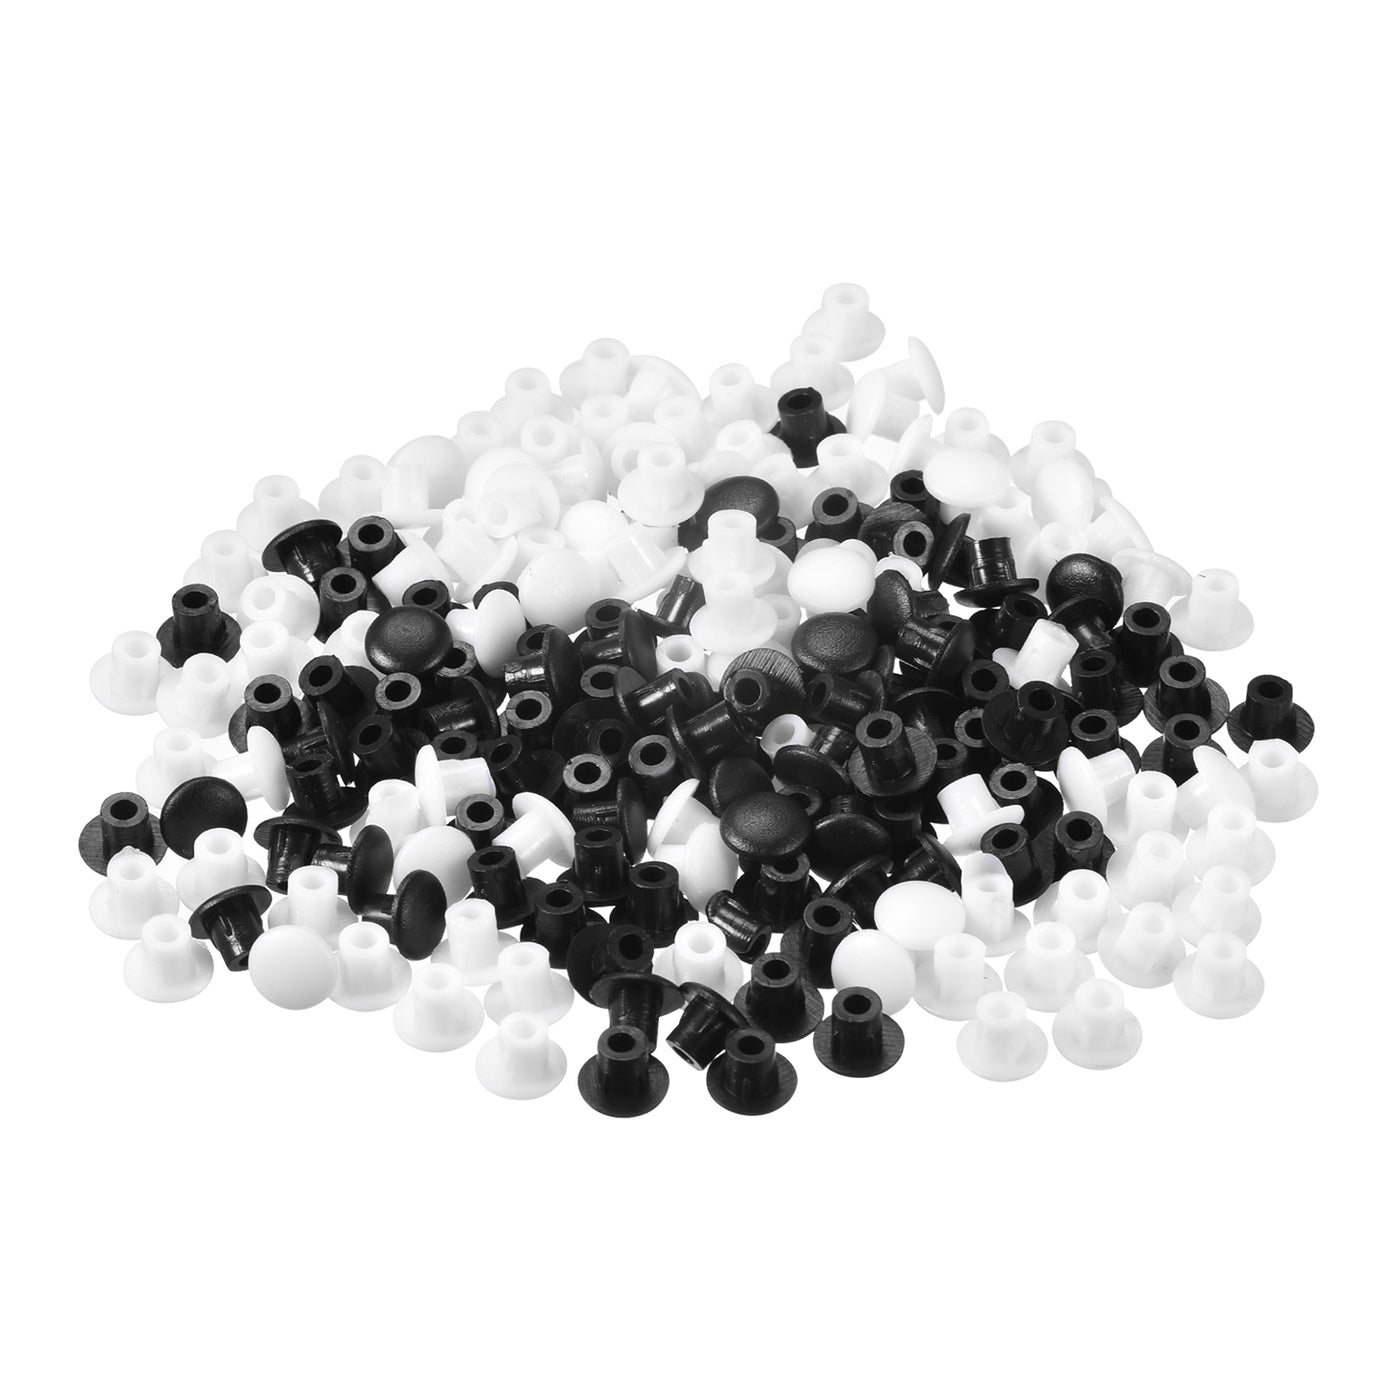 uxcell Uxcell Screw Hole Plugs, 5mm(3/16") Dia PP Snap in Shelf Button Flush Type Caps for Furniture Cabinet Cupboard, Black/Milky White 200 Pcs